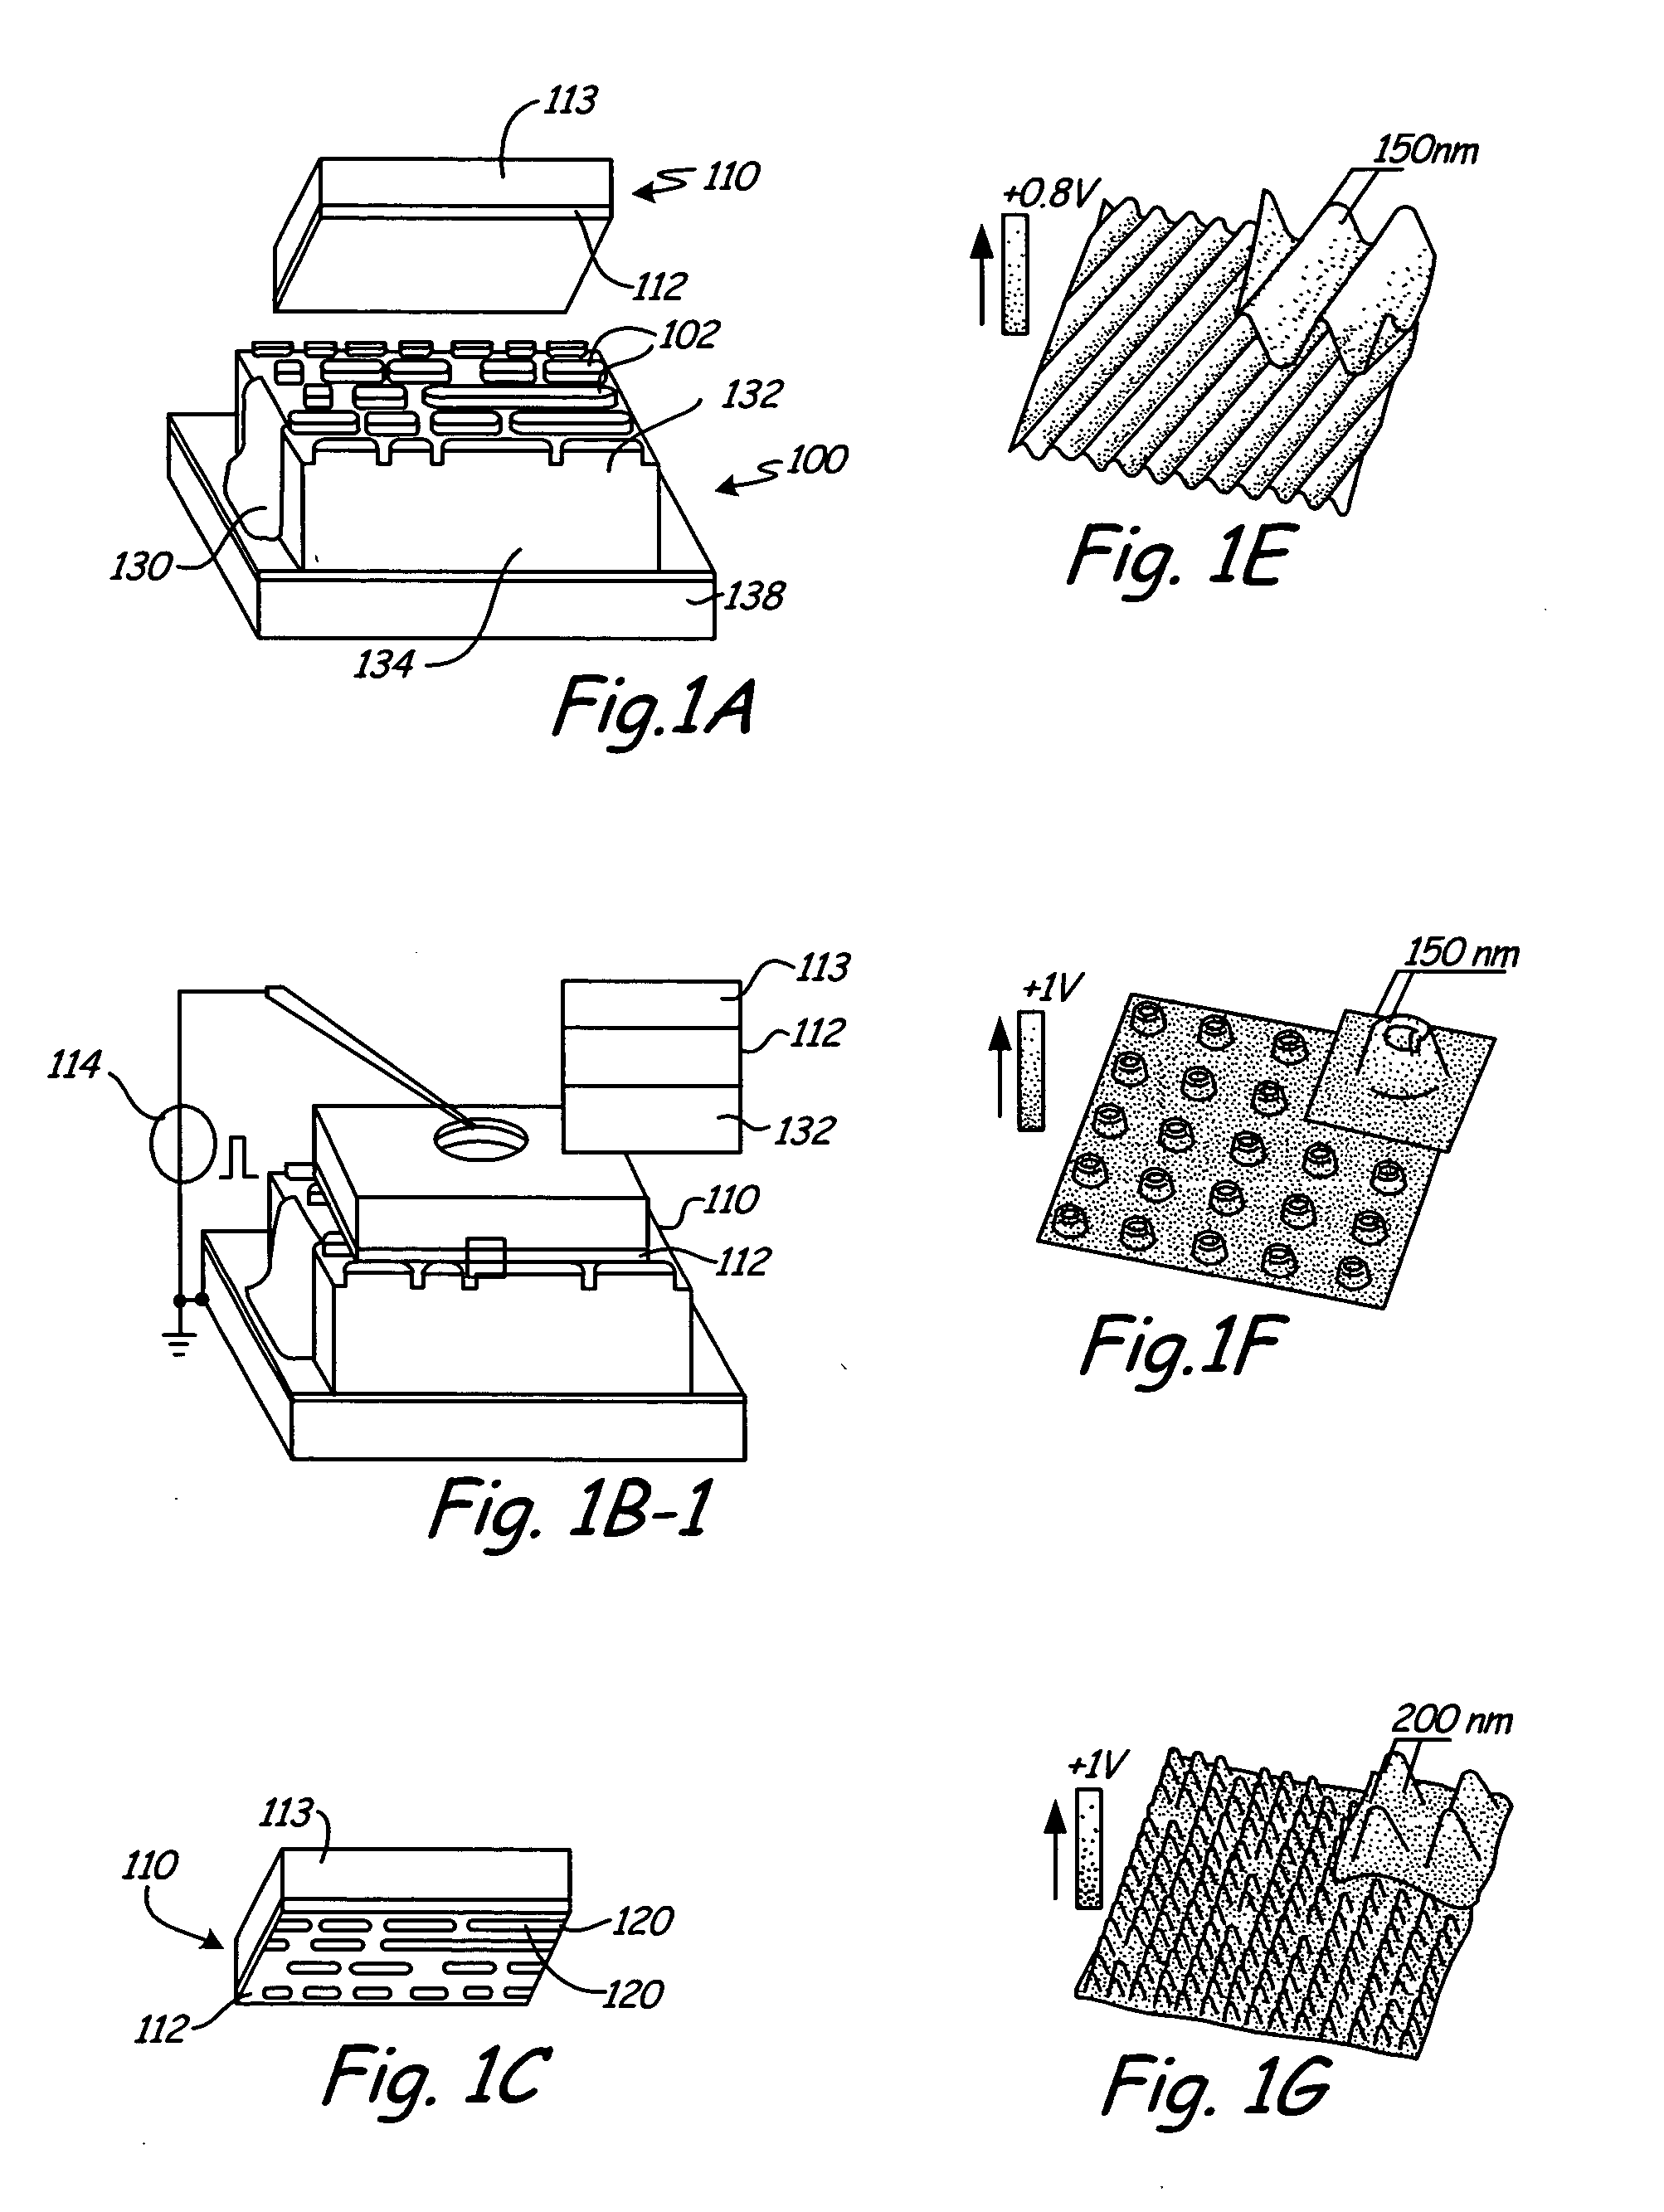 Method and apparatus for depositing charge and/or nanoparticles